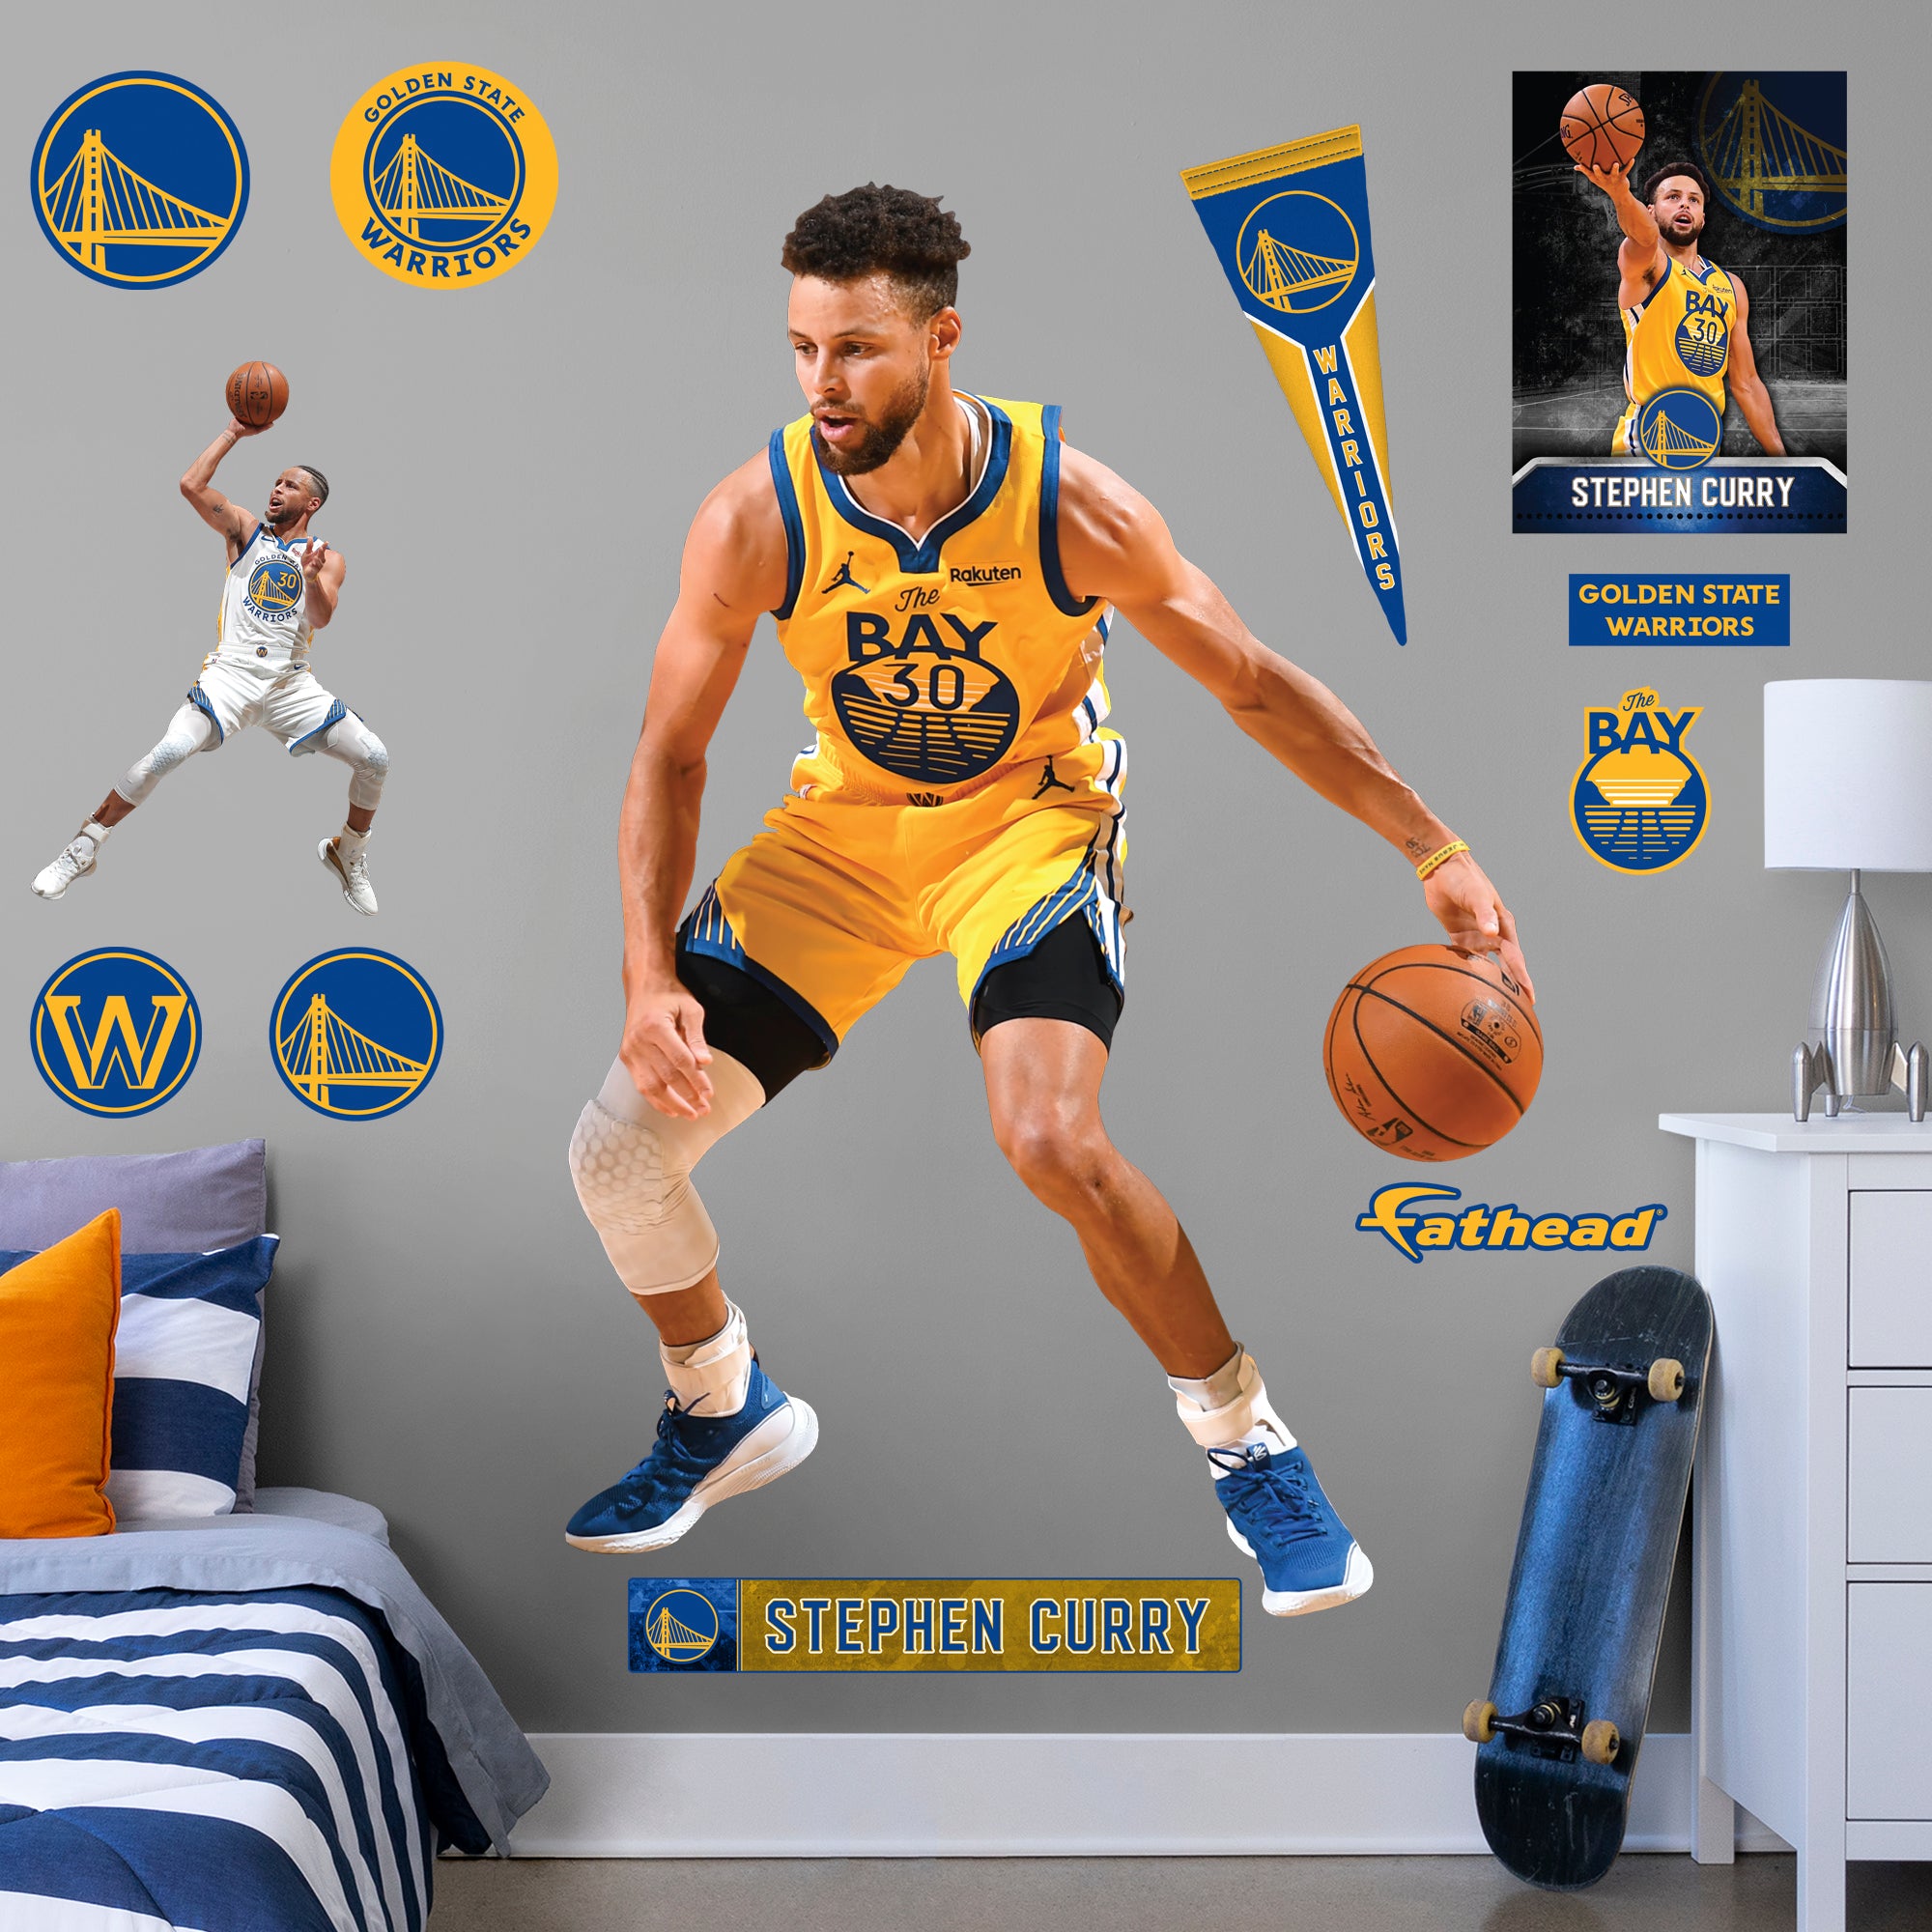 Steph Curry Night Night Bundle Pack - Officially Licensed NBA Fatheads